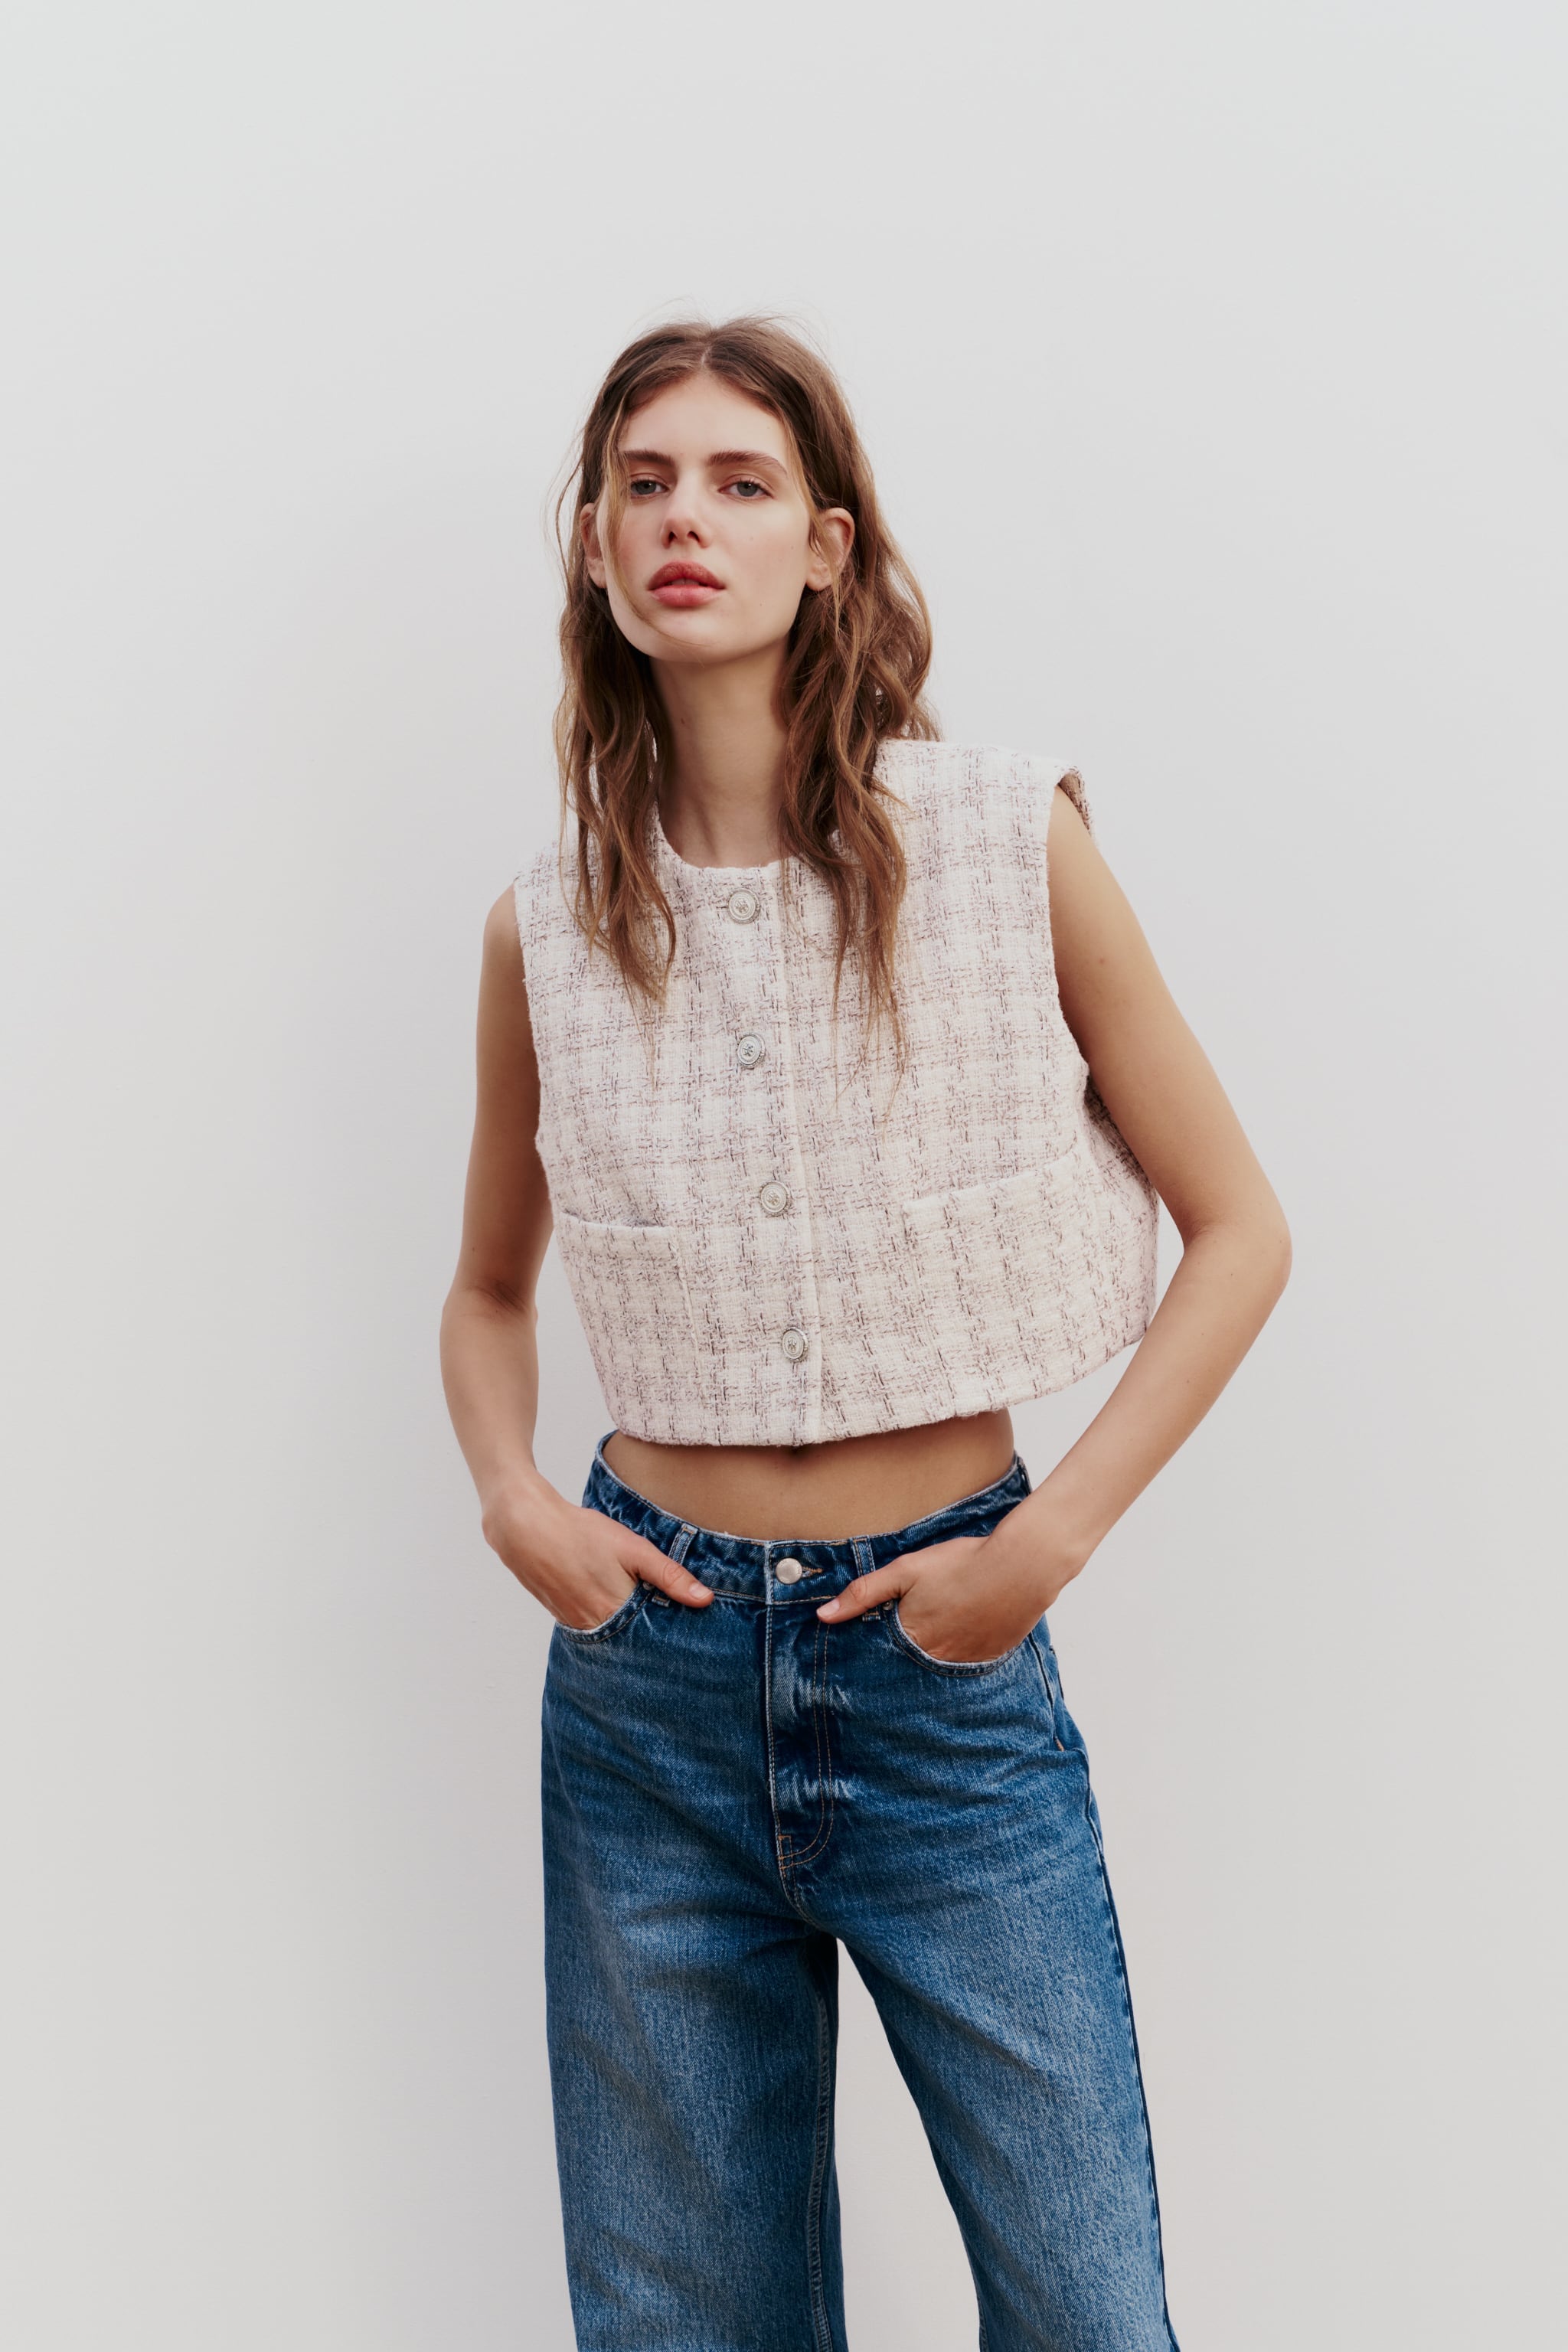 TEXTURED CROPPED VEST